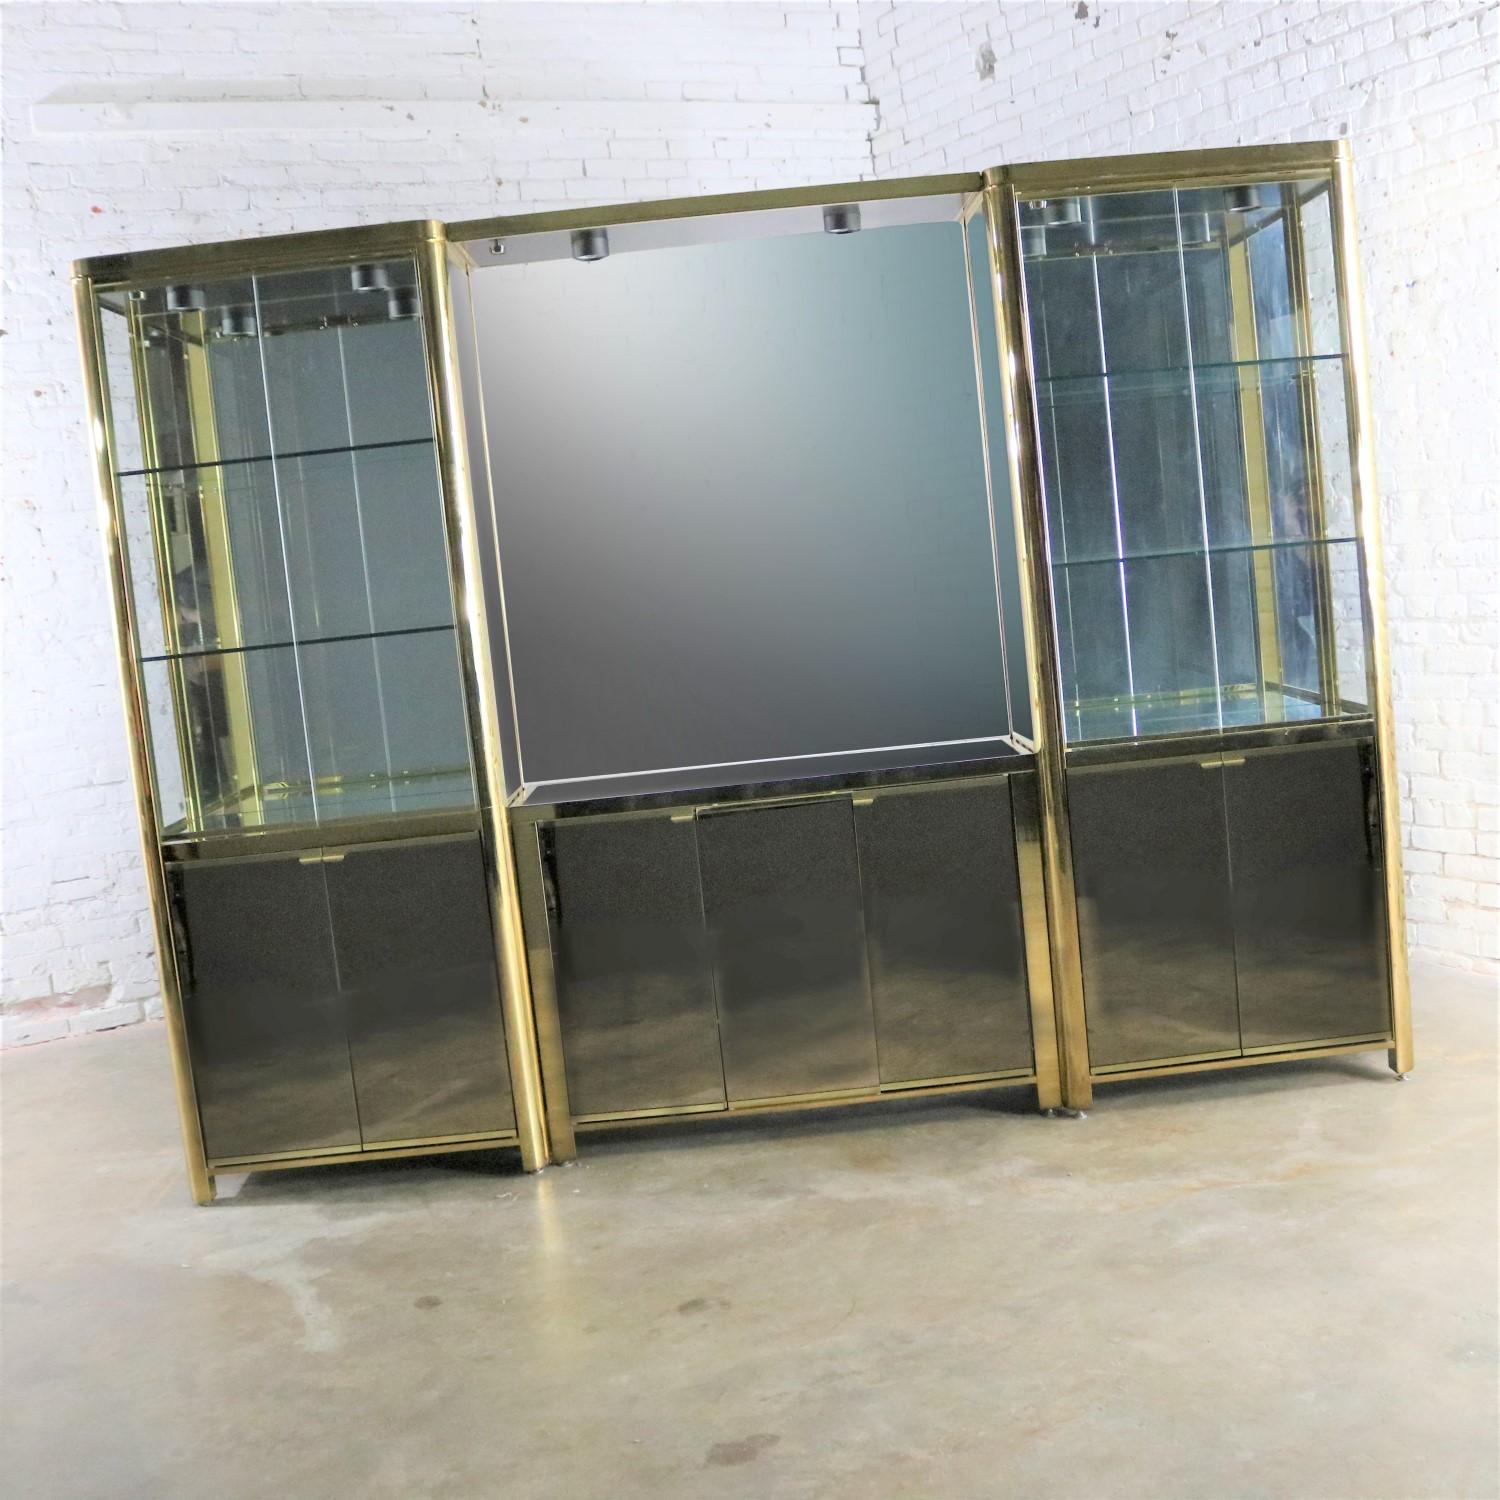 Magnificent modern triple wide lighted vitrine or display cabinet in brass plated metal, glass, and mirror. Unmarked but similar in style and quality of Ello or Mastercraft. Each piece is finished on both side so they are each able to stand on their